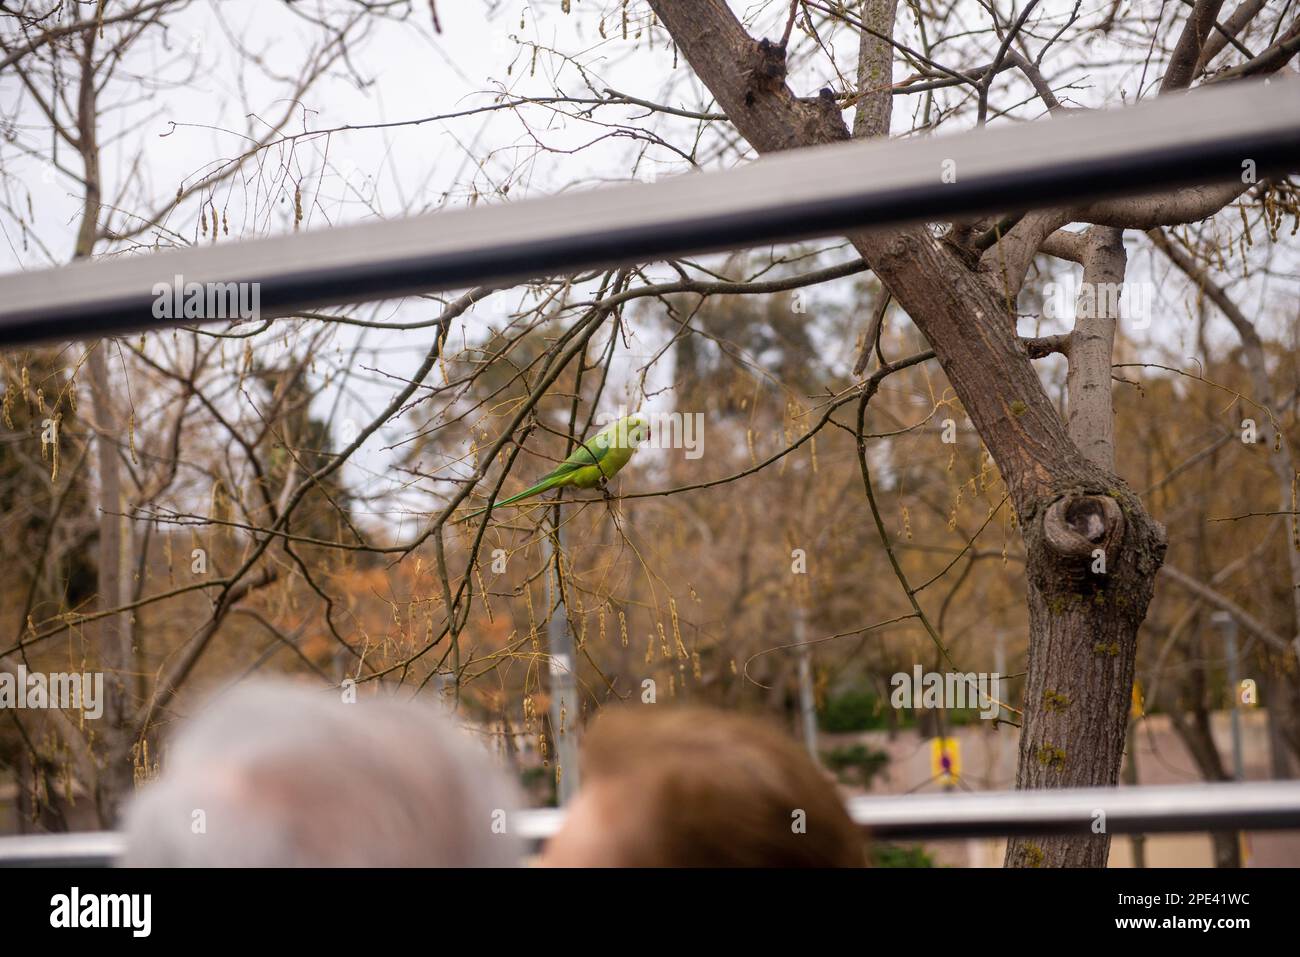 A parakeet perched on a tree looks at tourists driving beneath him in a sightseeing bus Stock Photo